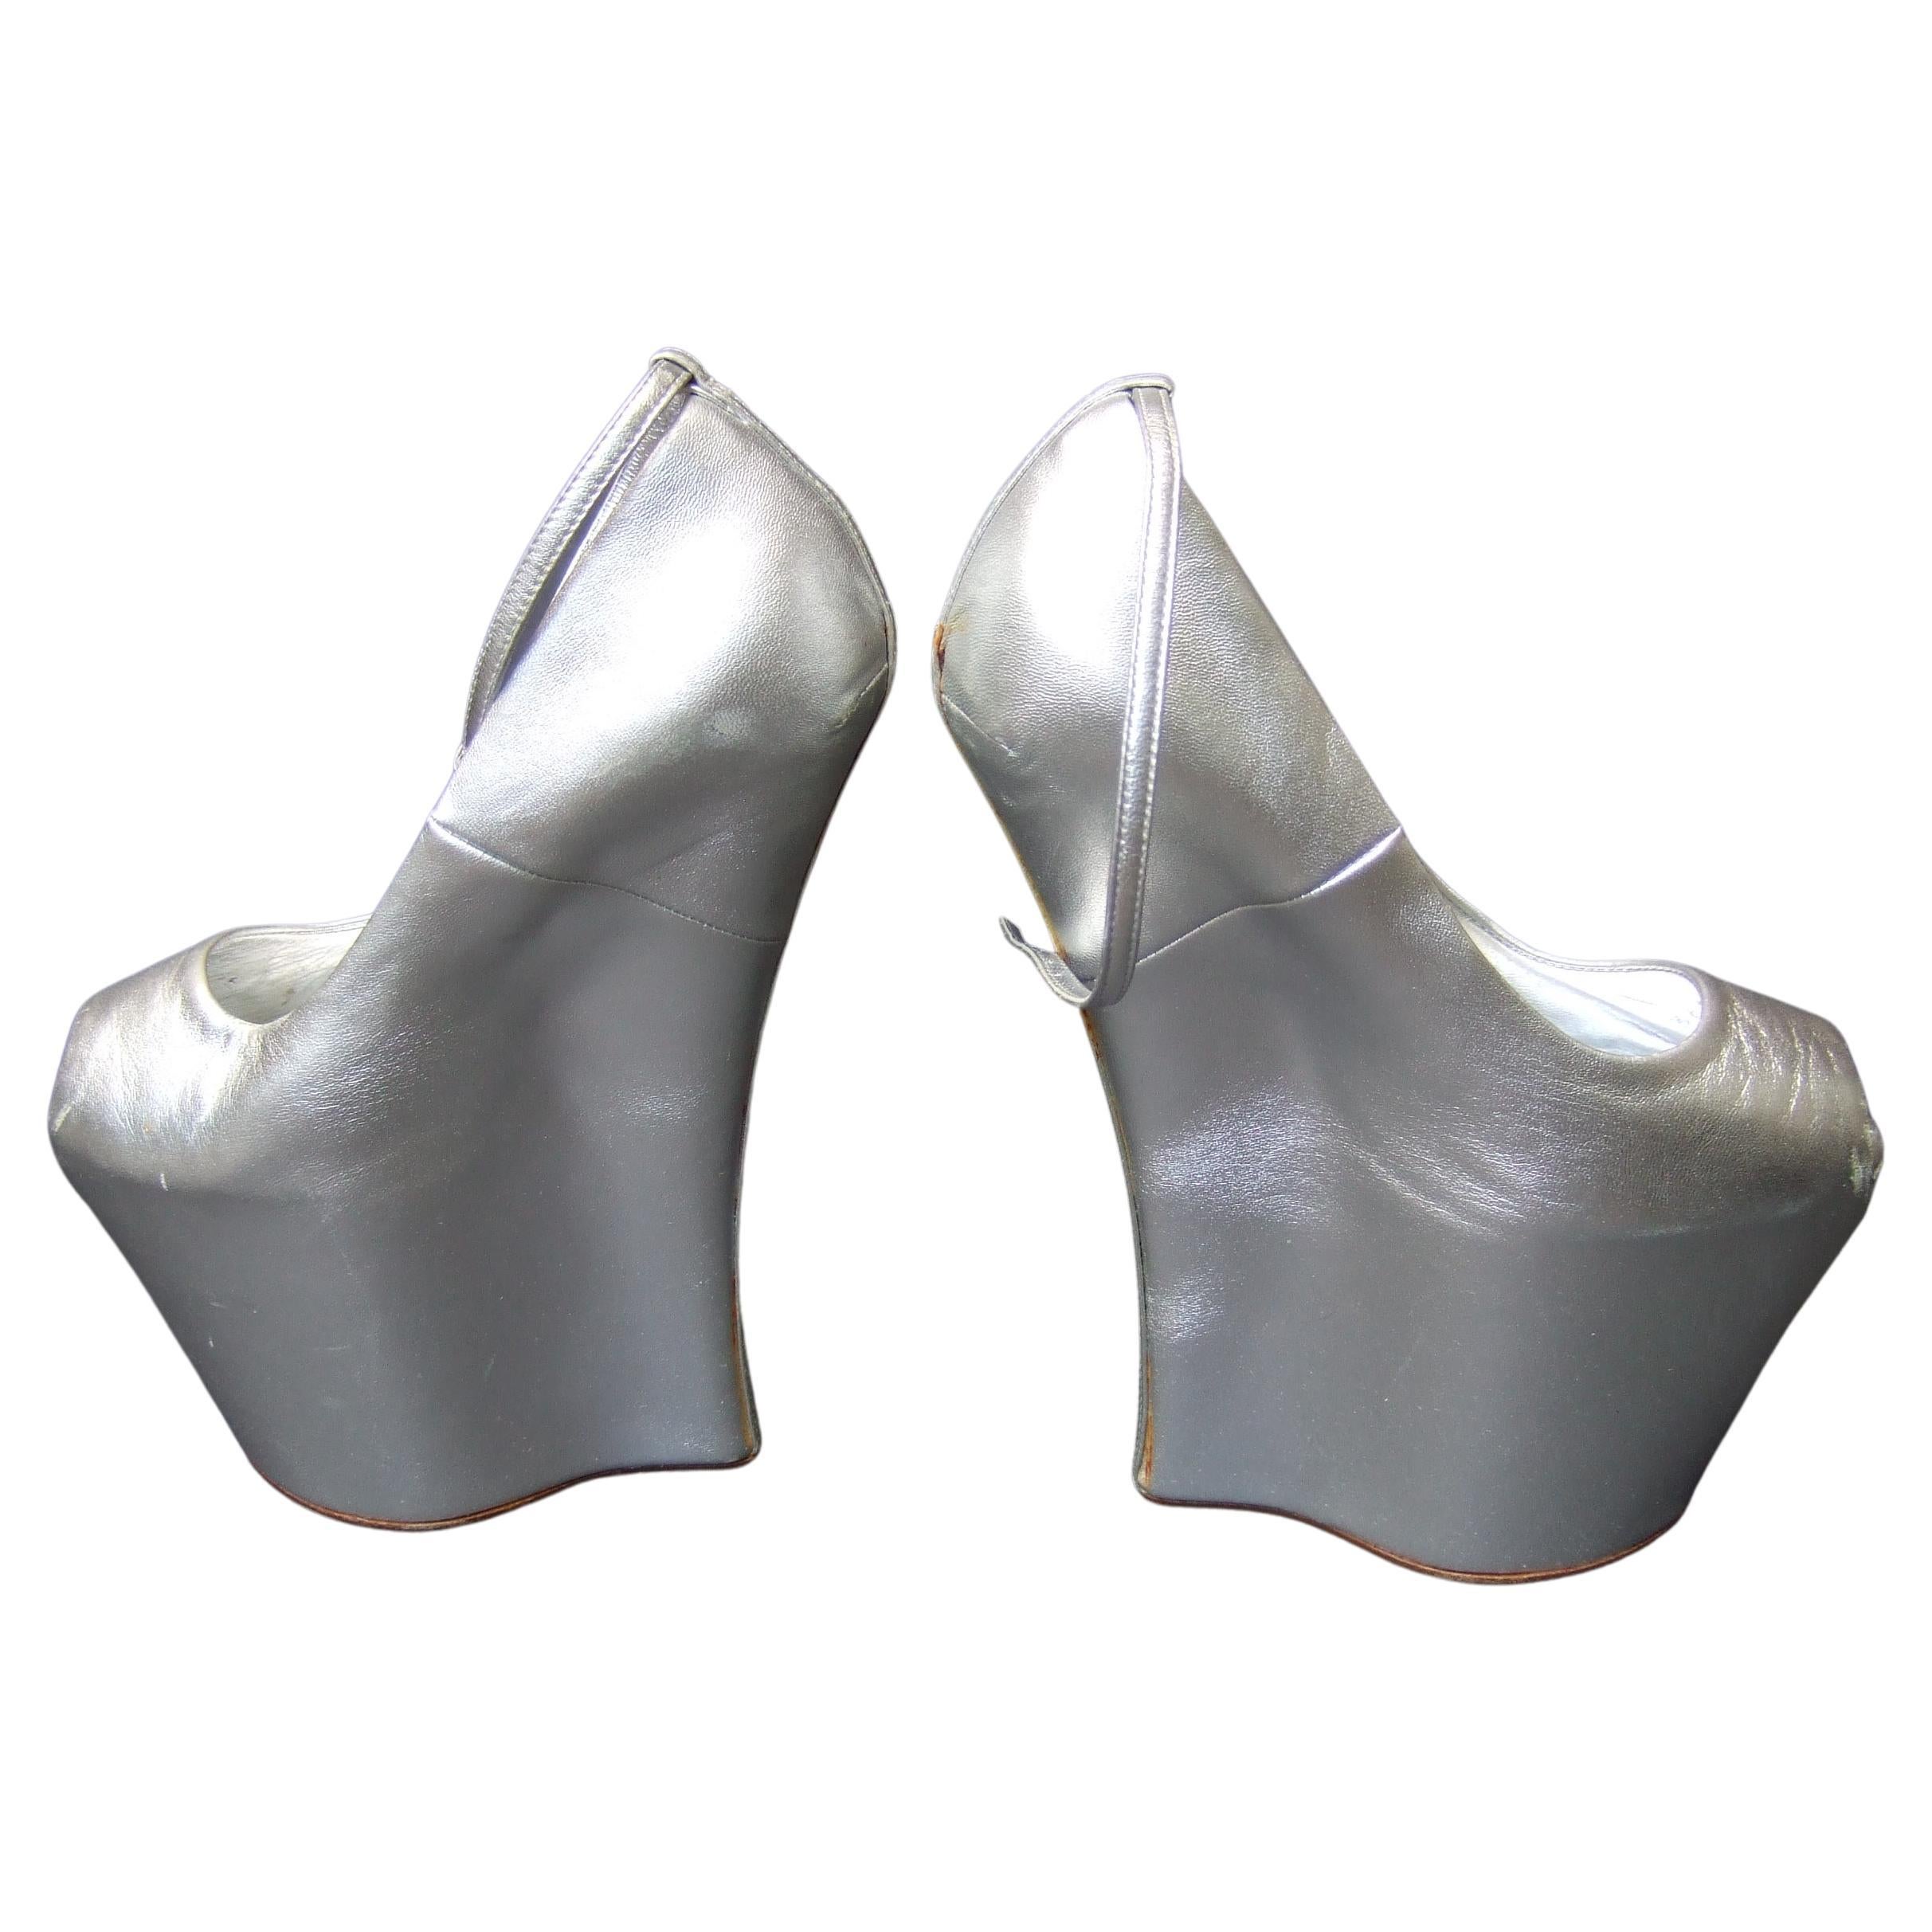 Vivienne Westwood elevated court shoe, c. 1990s For Sale at 1stDibs  vivienne  westwood black heels, vivienne westwood heels, 1990s shoes